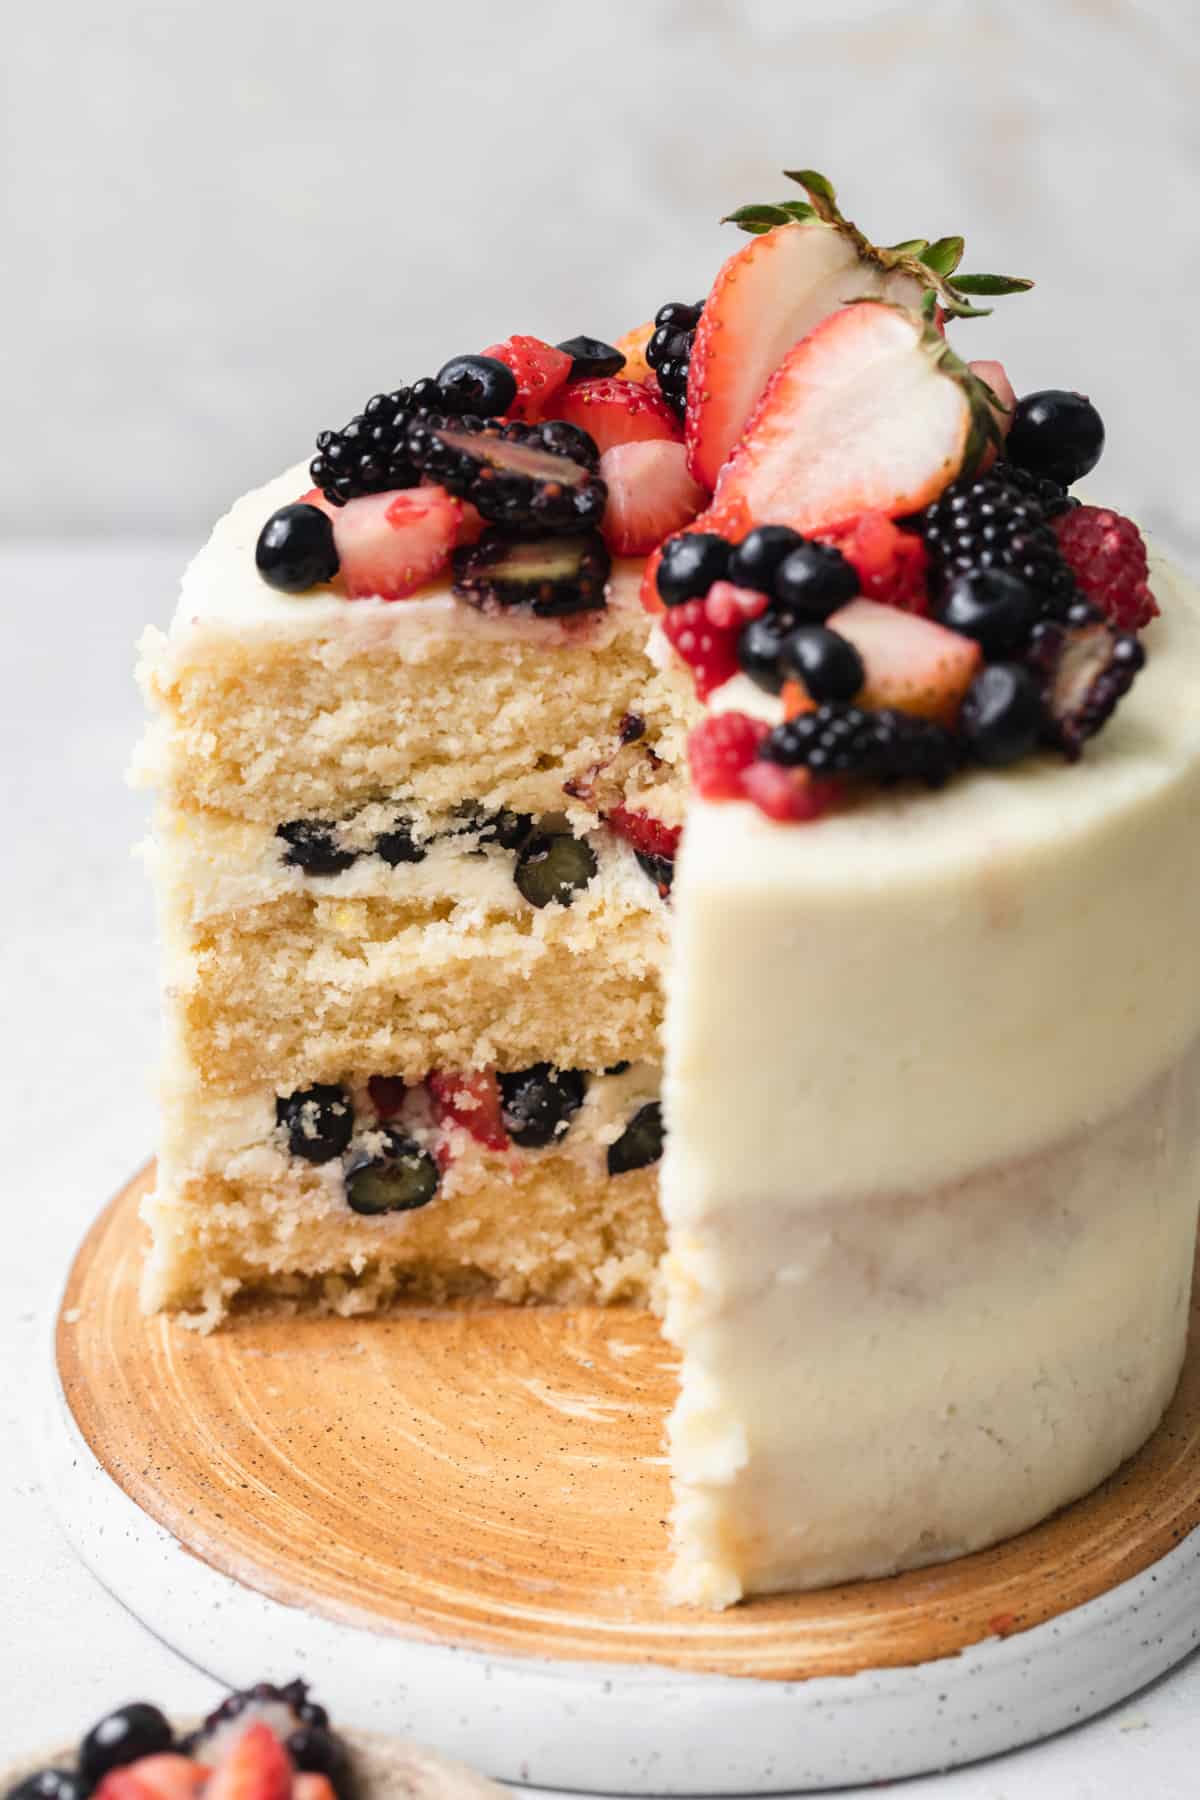 A cake topped with berries cut open to show texture.